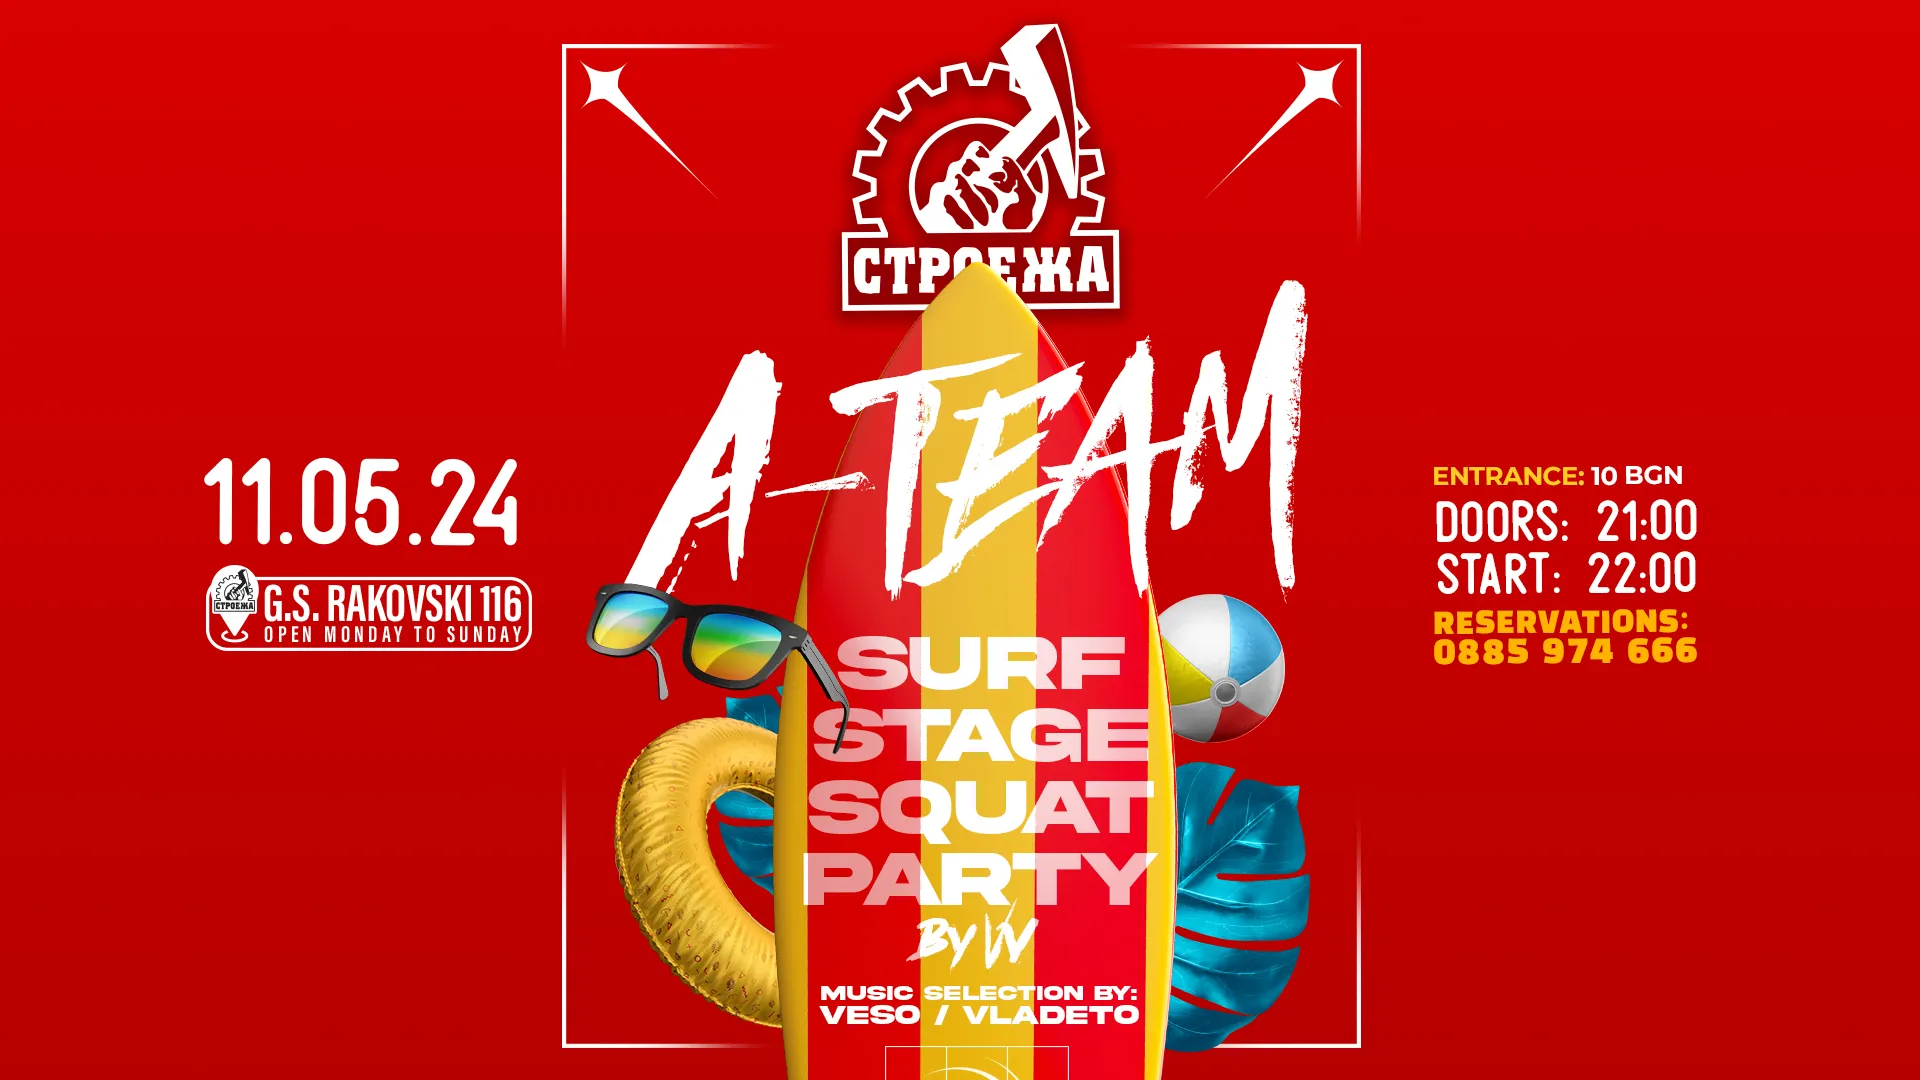 A-TEAM SURF / STAGE / SQUAT Party by VV